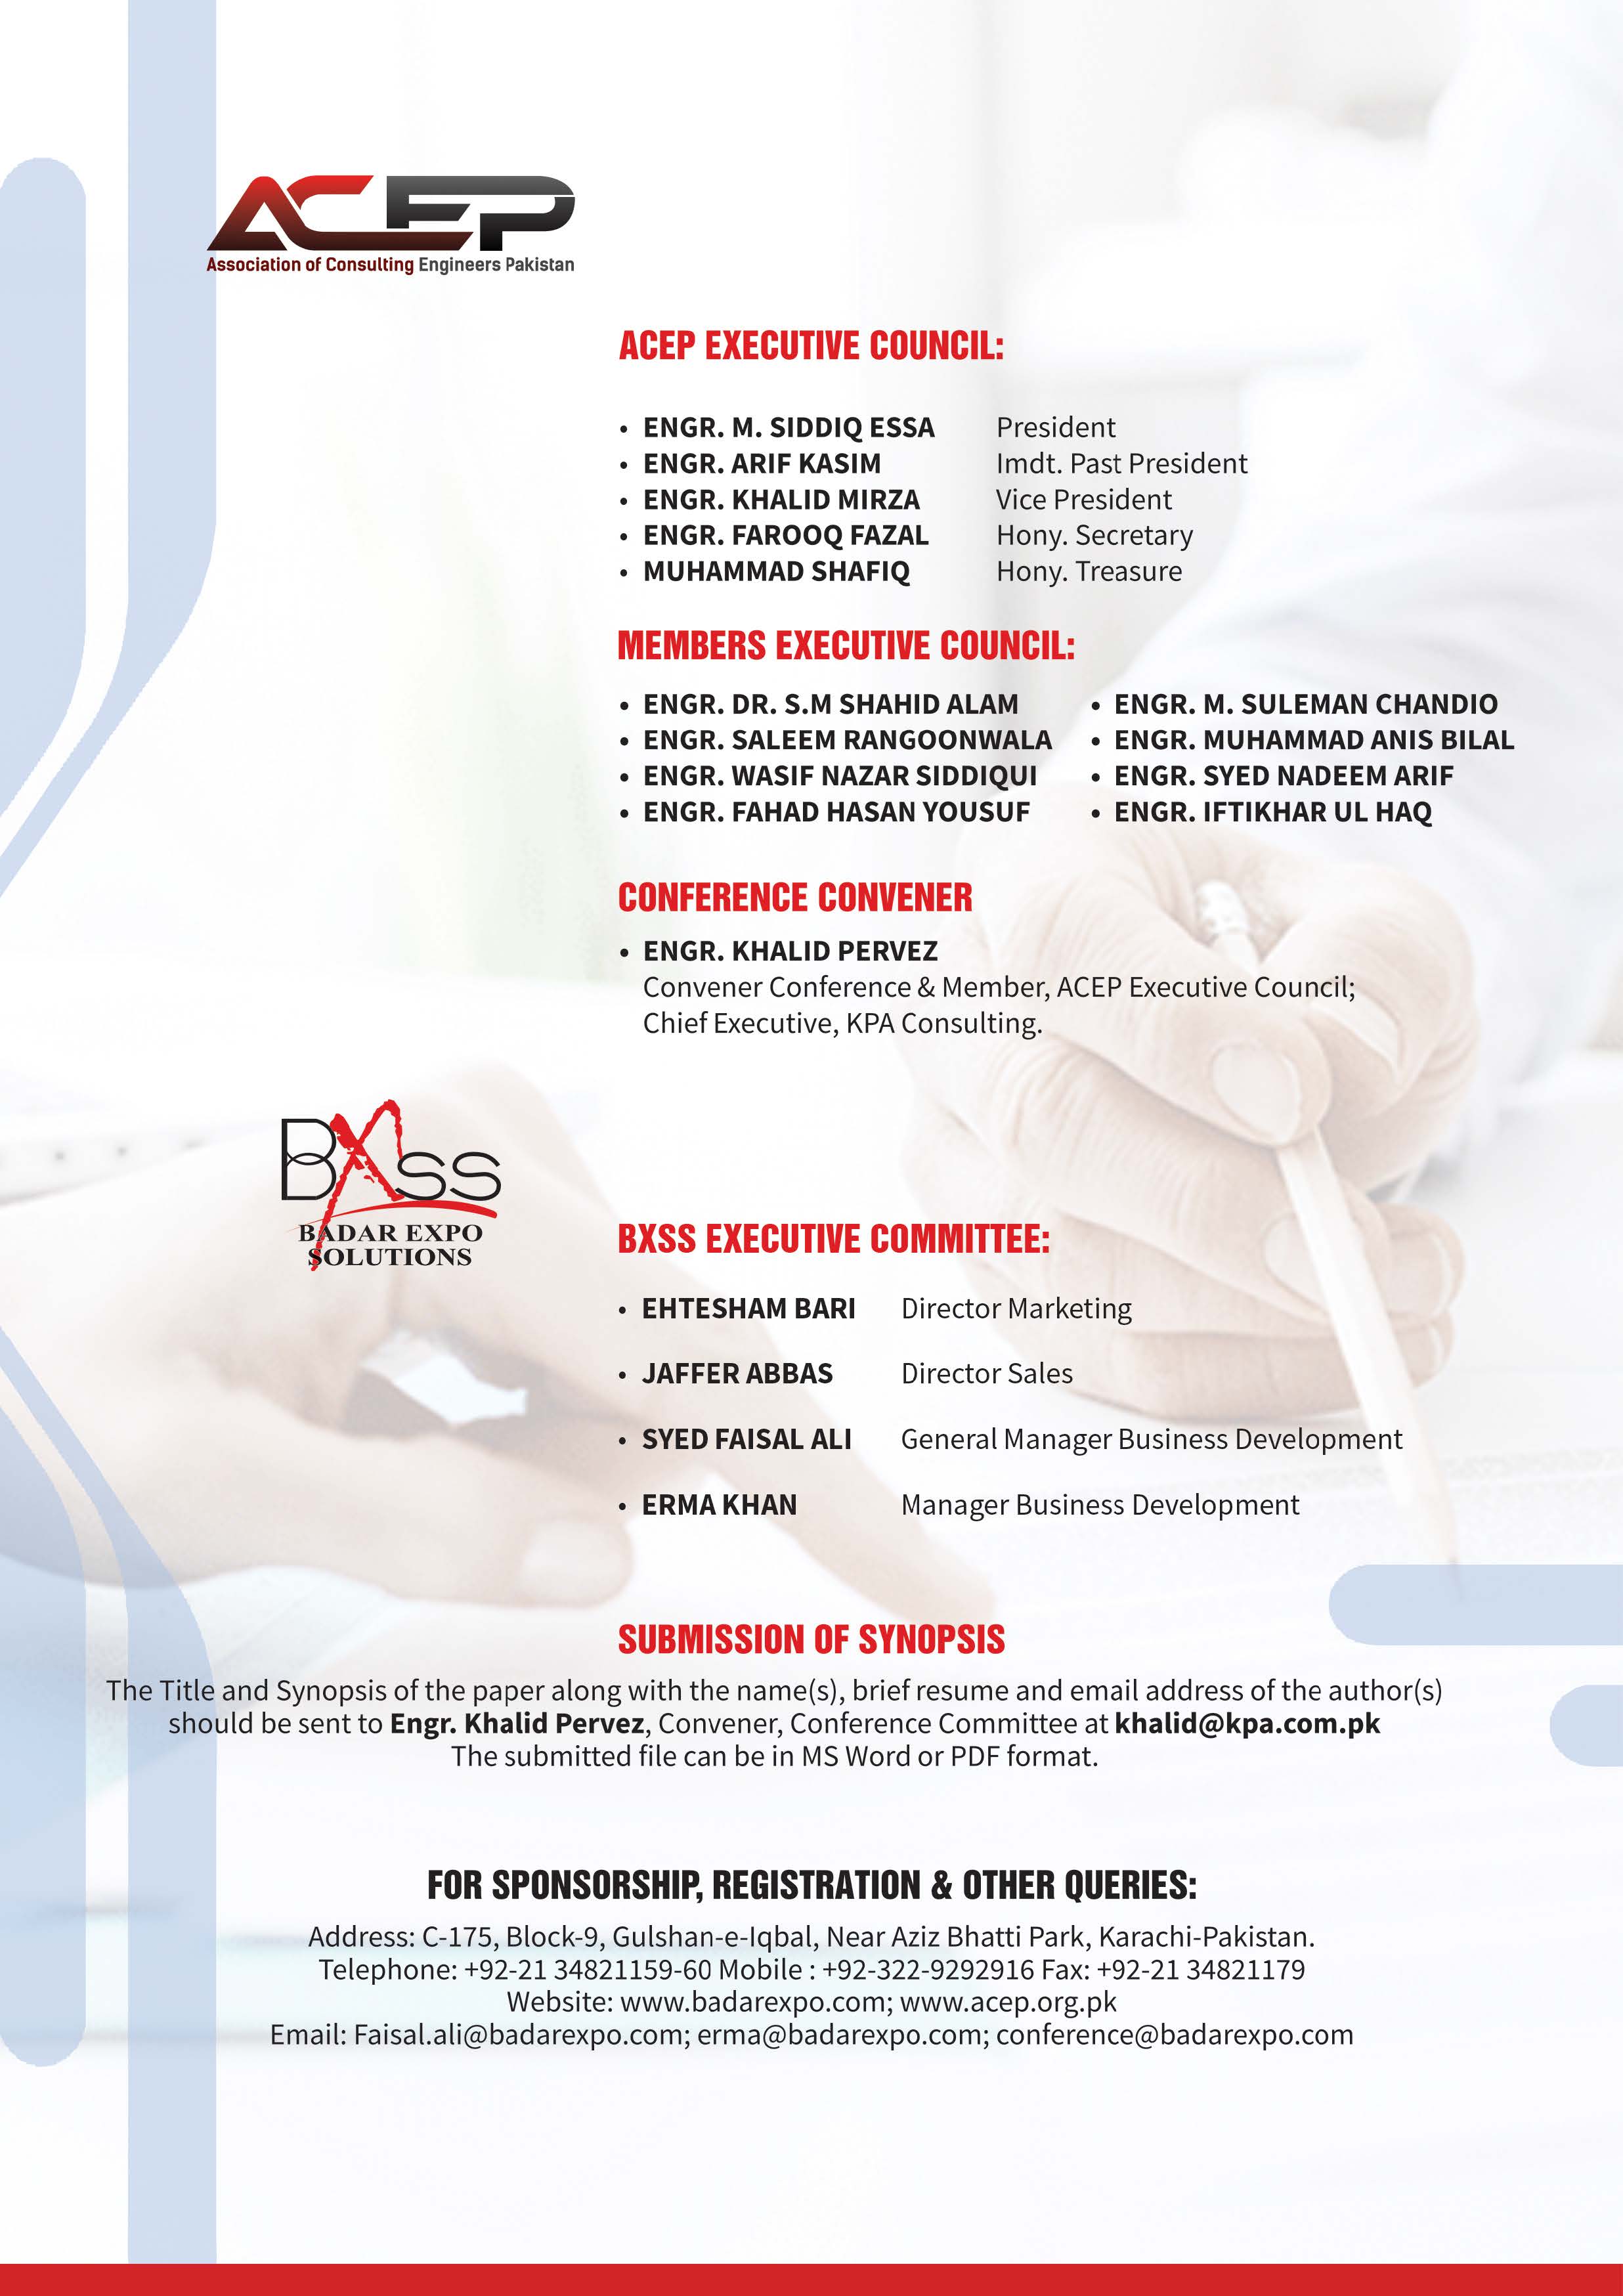 ACEP Conference-2019 brochure_Page_4_Image_0001.jpg